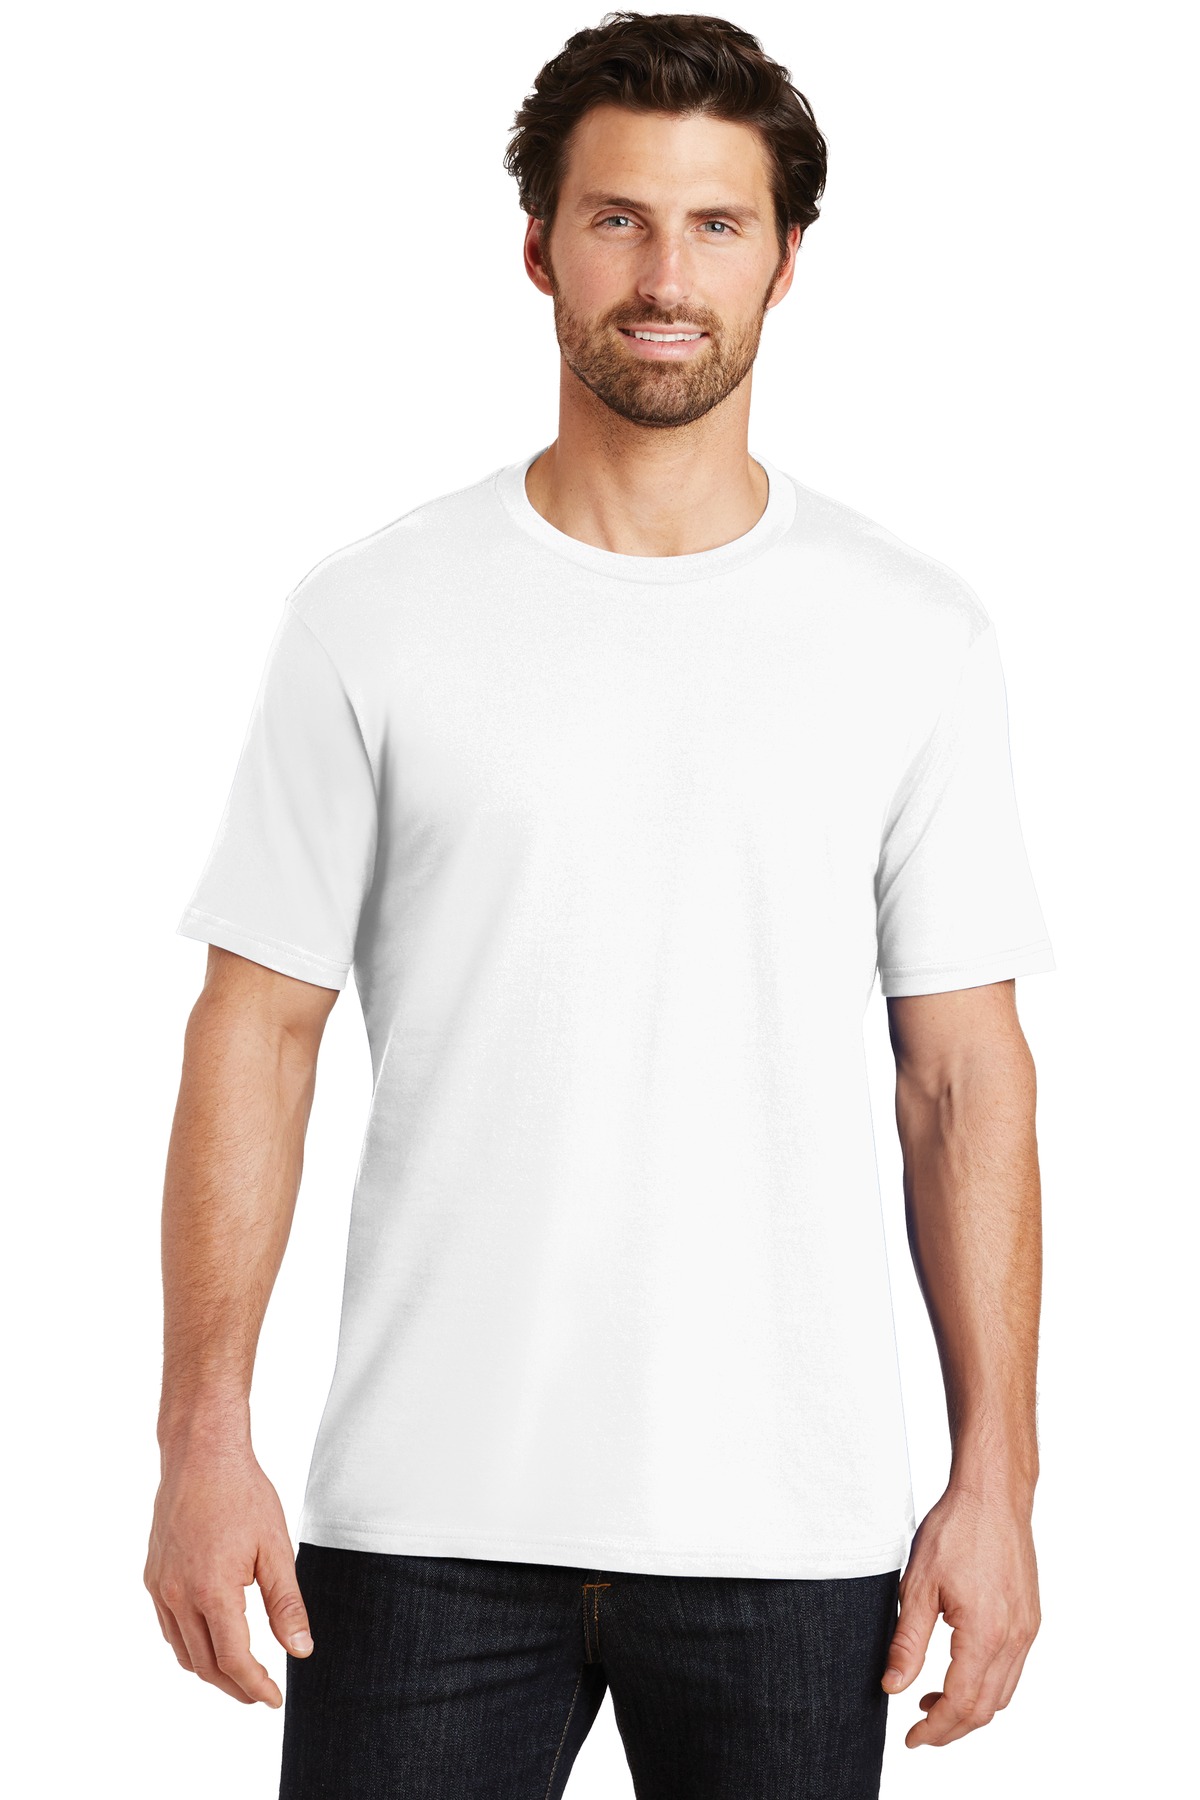 District Hospitality T-Shirts ® Perfect Weight®Tee.-District